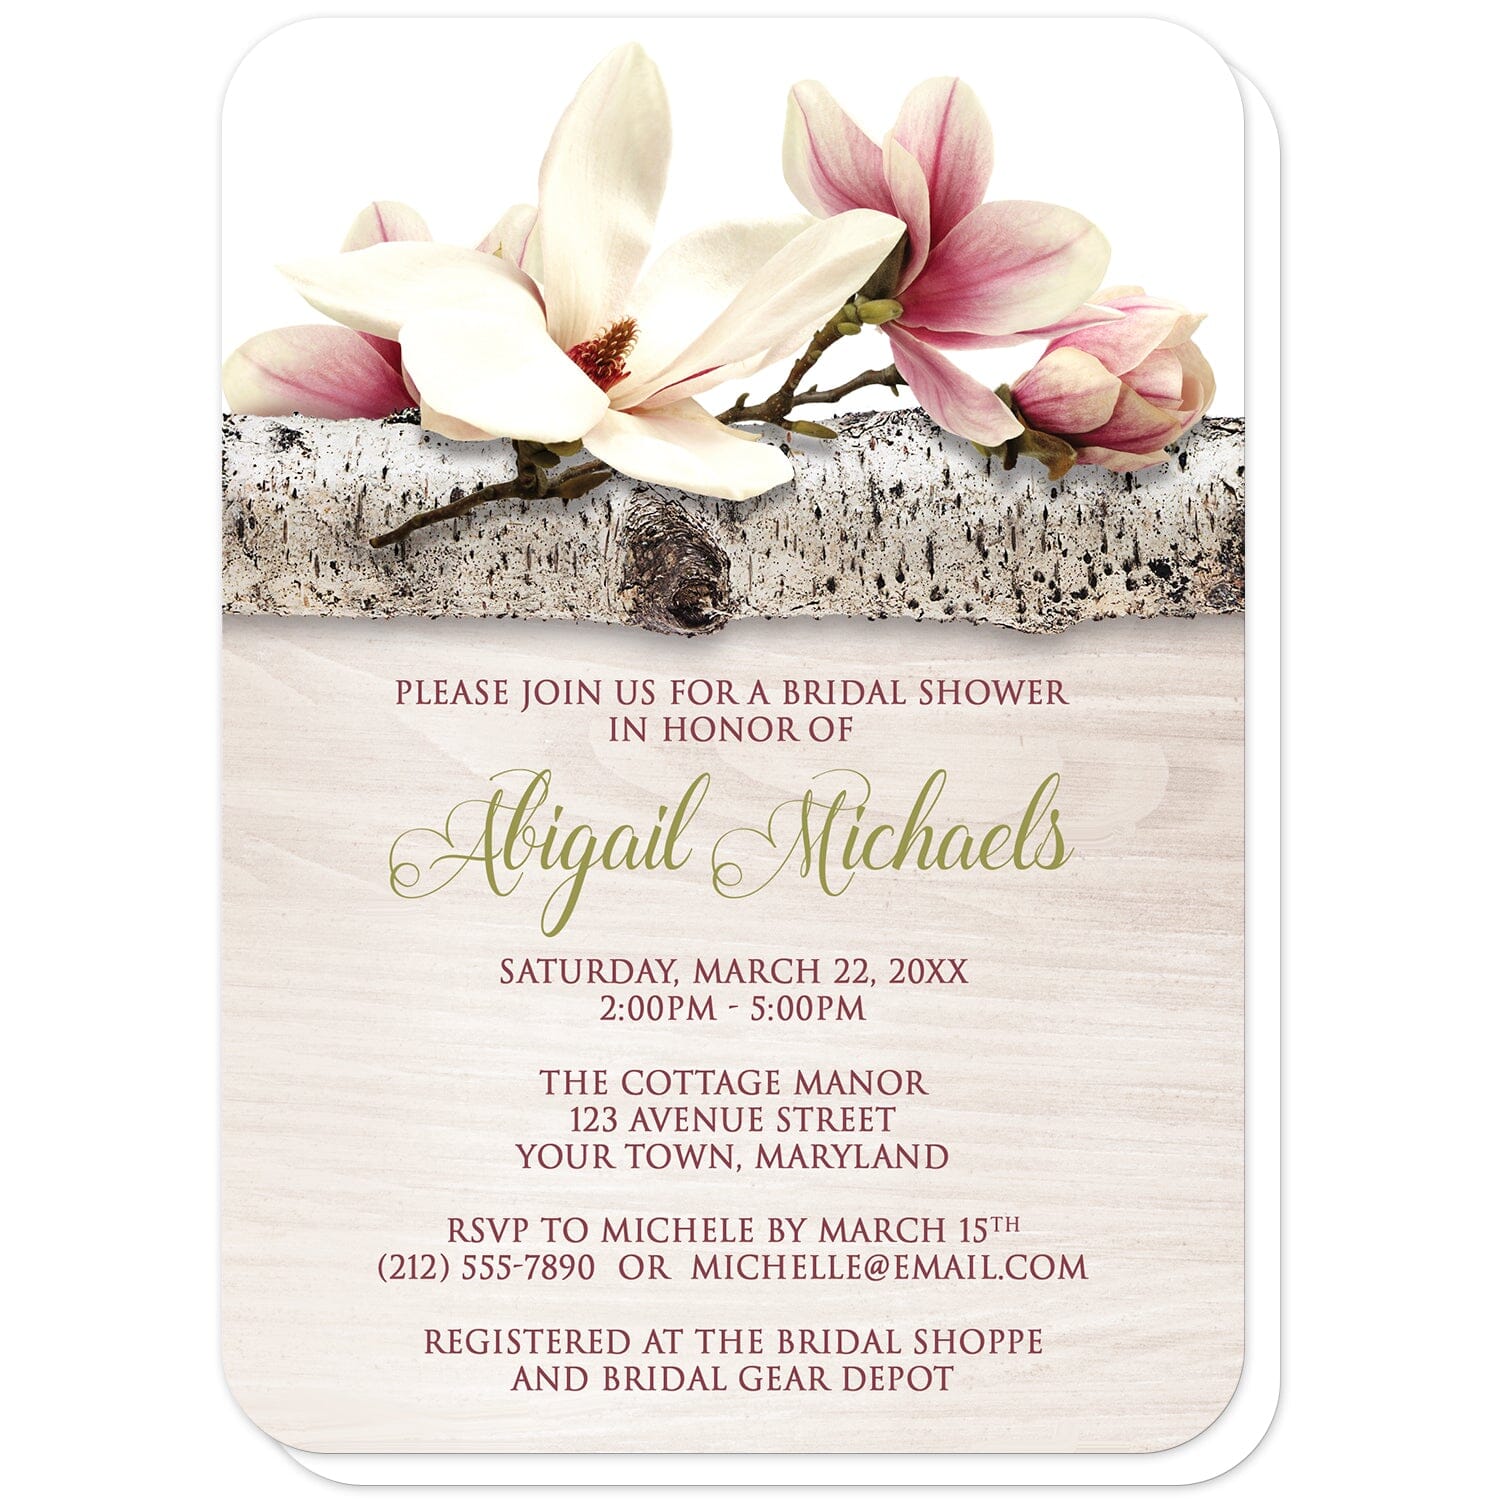 Magnolia Birch Light Wood Floral Bridal Shower Invitations (with rounded corners) at Artistically Invited. Beautiful magnolia birch light wood floral bridal shower invitations with pink and white magnolia flowers laying on a birch tree branch along the top. Your personalized bridal shower celebration details are custom printed in dark pink and light olive green over a light wood background illustration.